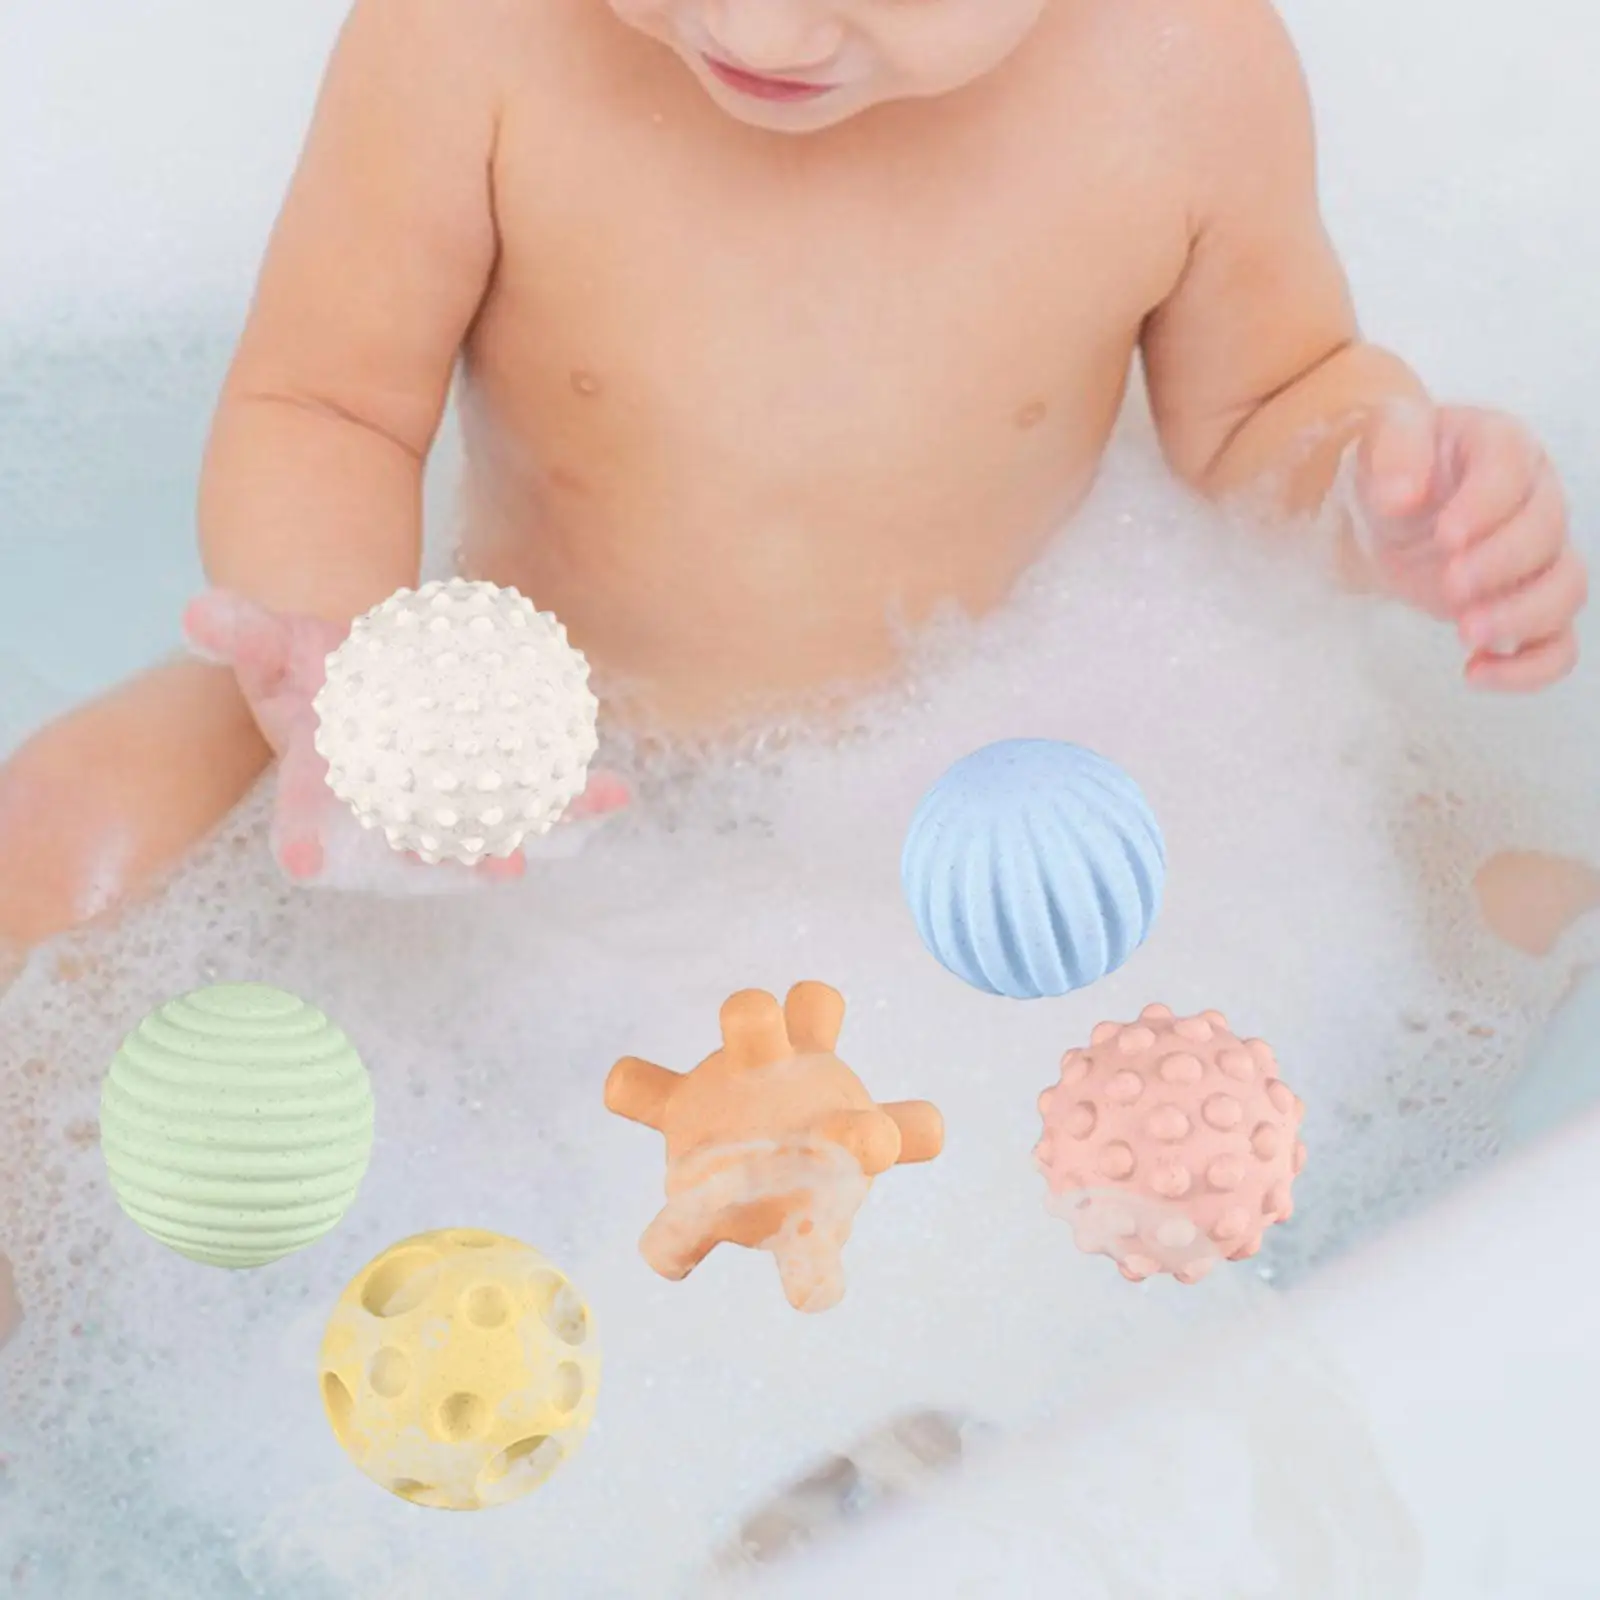  pcs sensory toy balls baby bath toy develop baby s tactile senses toyfor game swimming thumb200